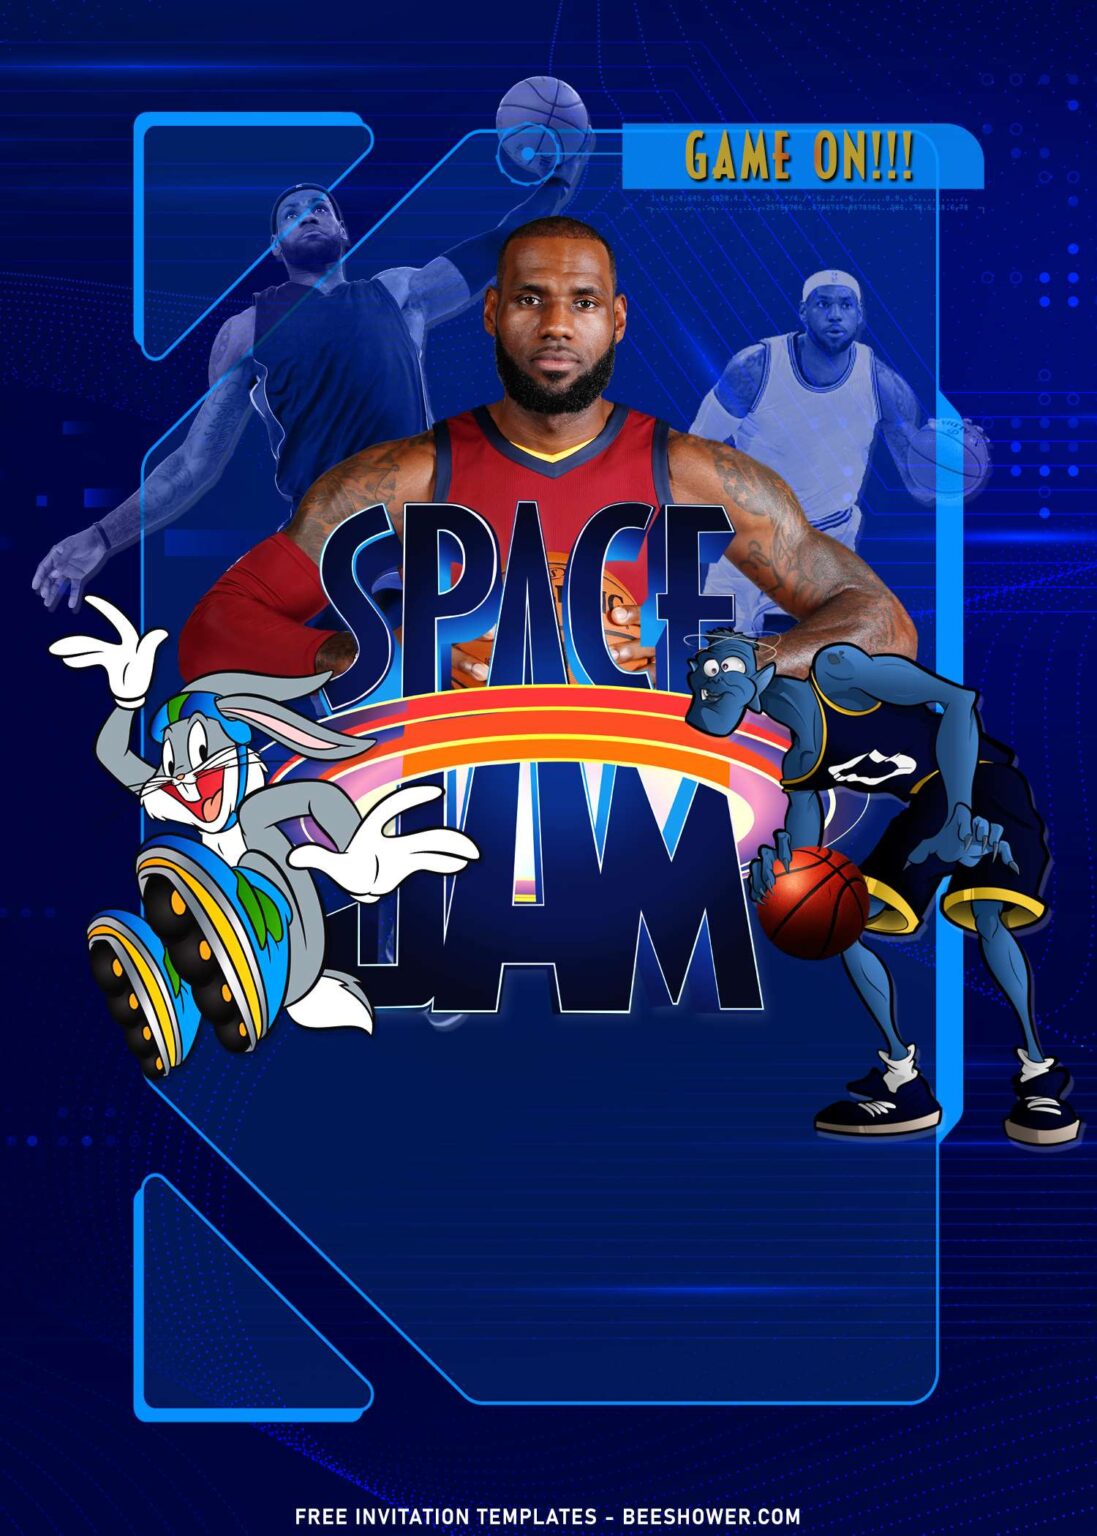 Download 9+ Awesome Space Jam Birthday Invitation Templates For Kids ...